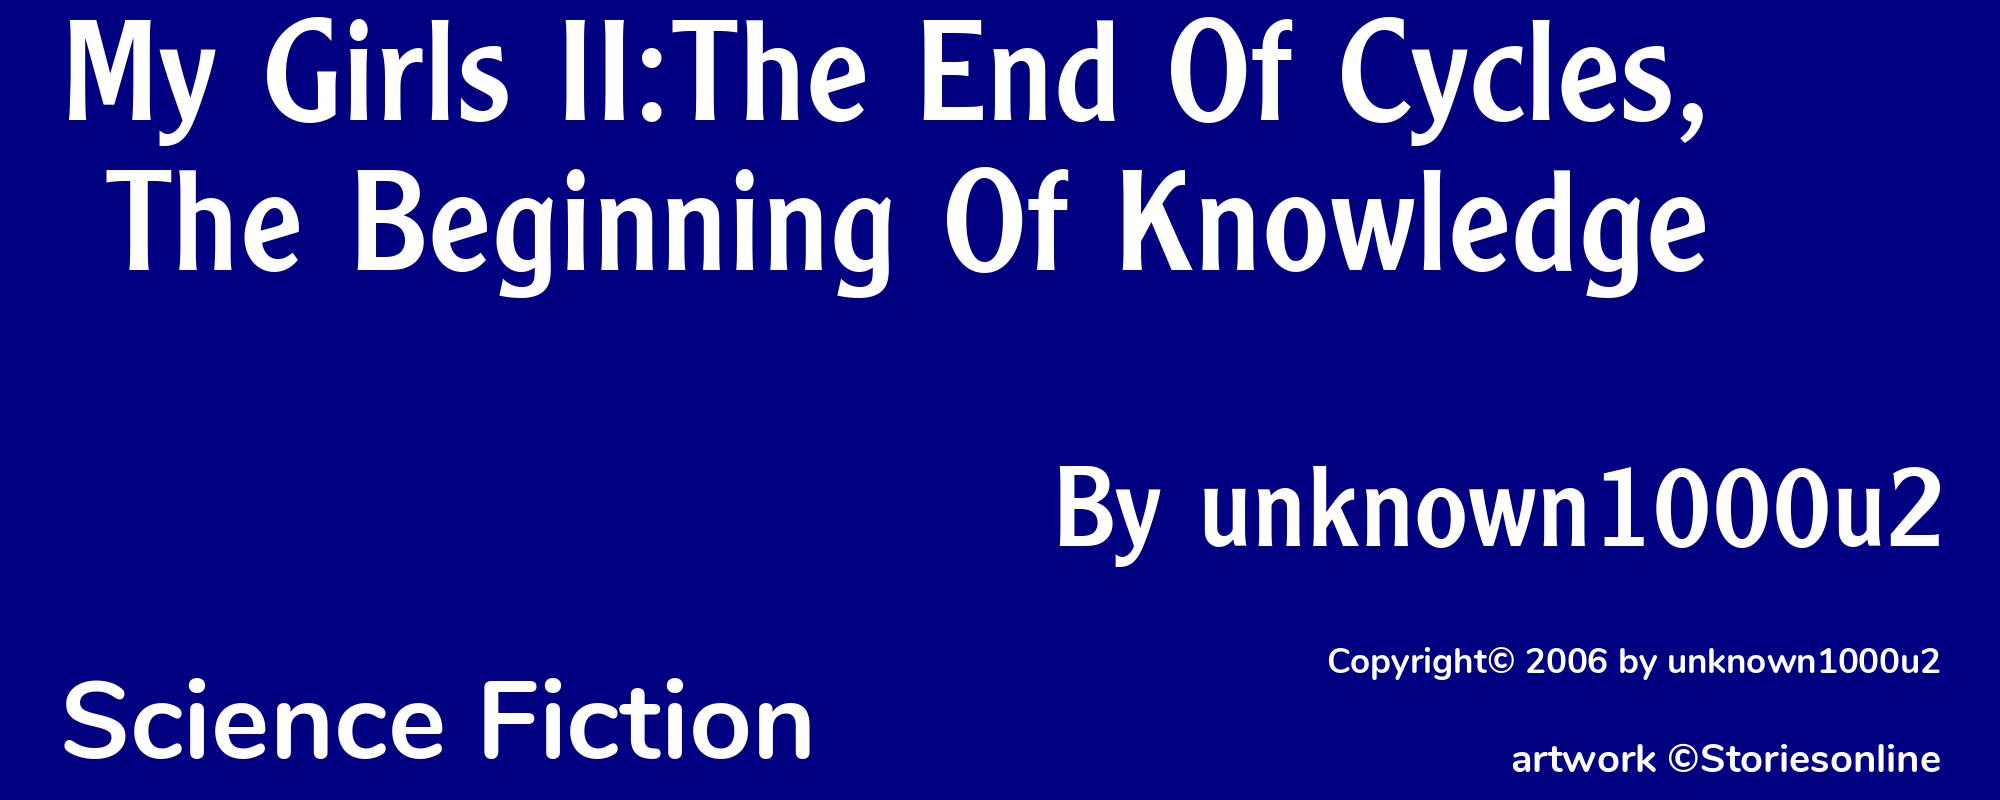 My Girls II:The End Of Cycles, The Beginning Of Knowledge - Cover